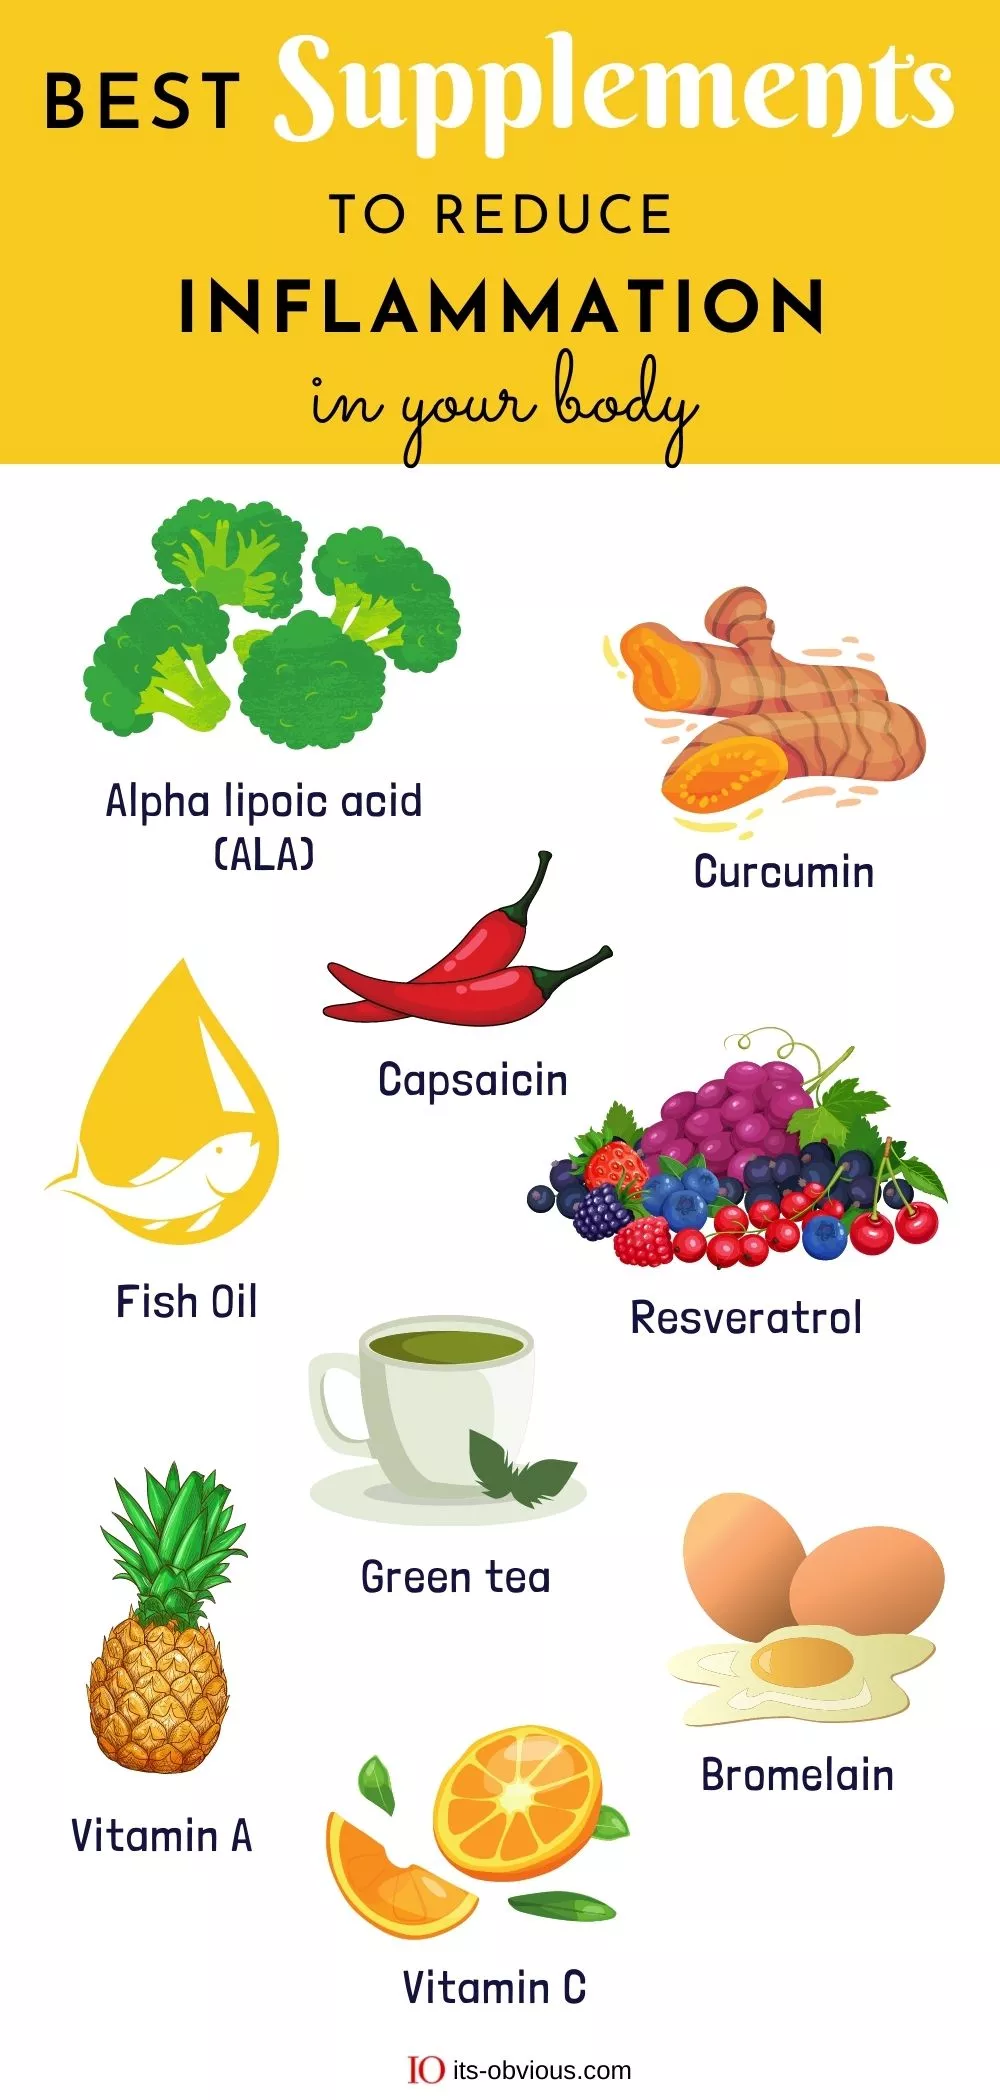 Best Natural Supplements to Reduce Inflammation in the Body